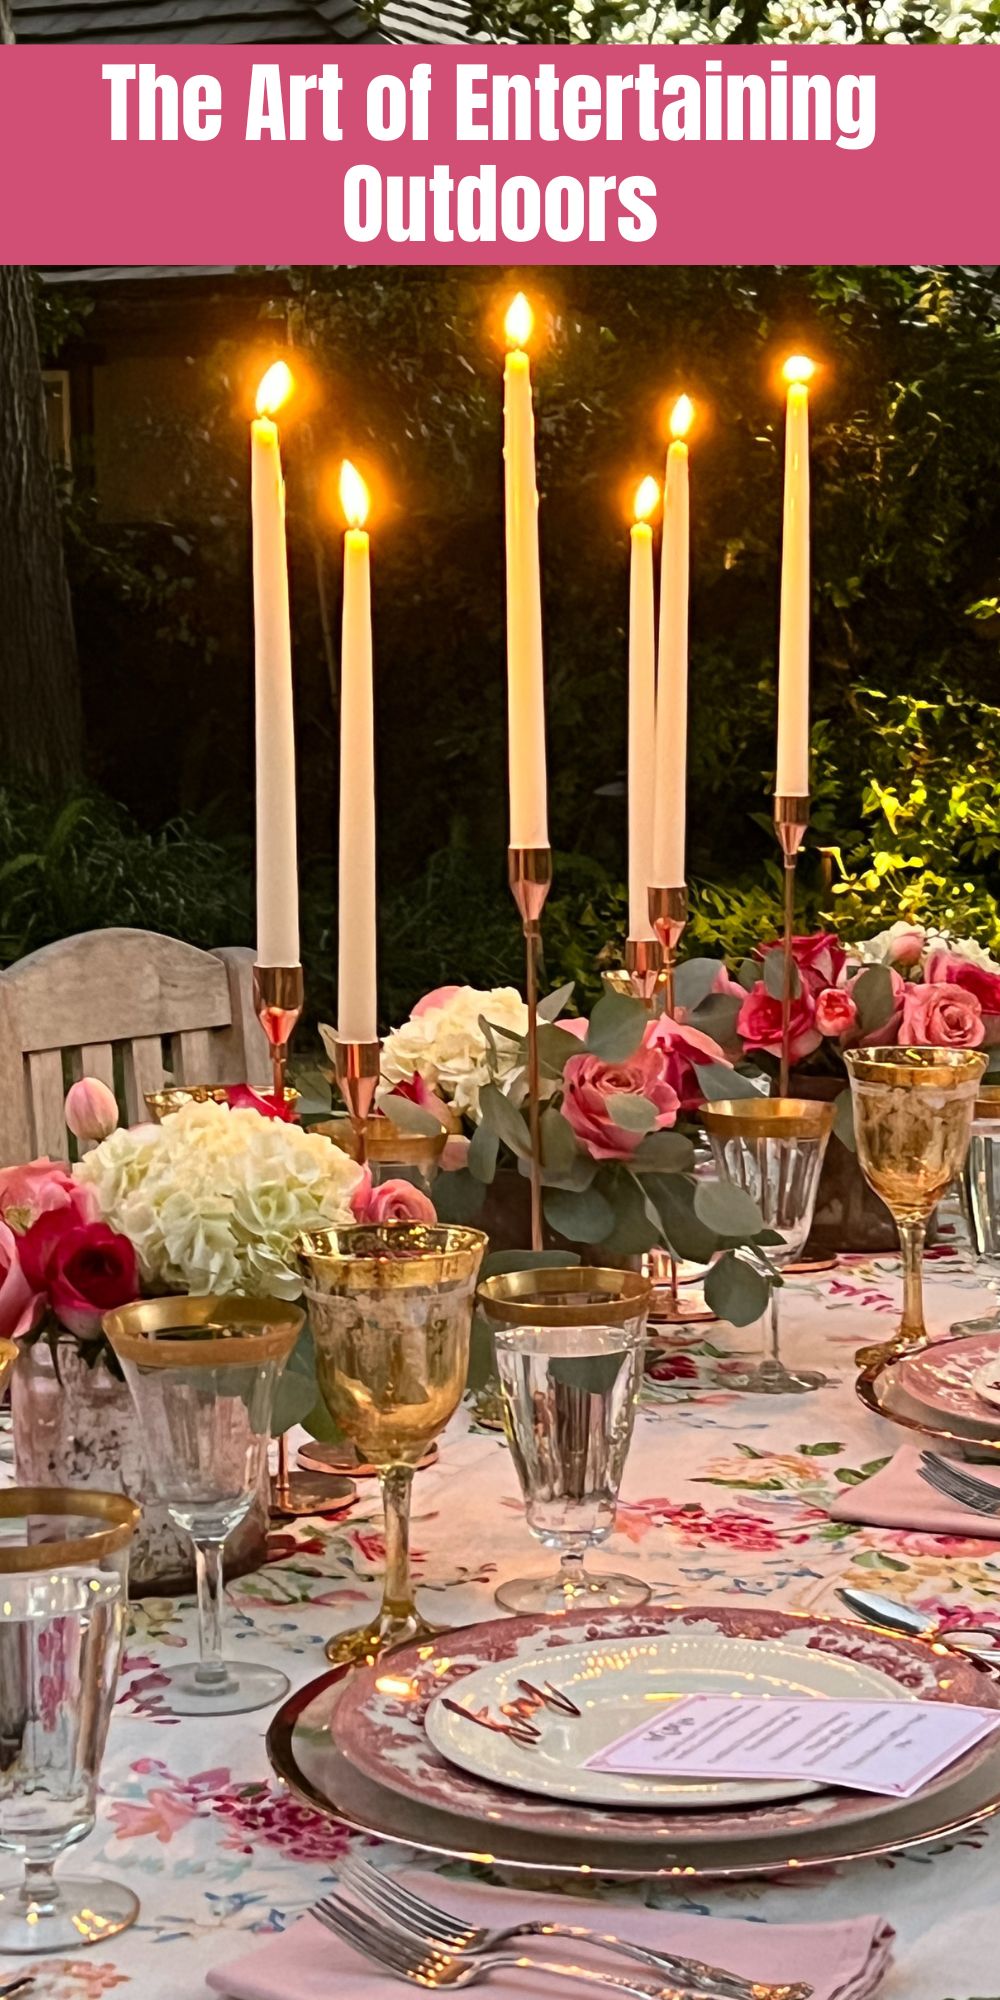 On Saturday, we hosted a dinner in our backyard. I am so passionate about the art of entertaining even when we have never met our guests!